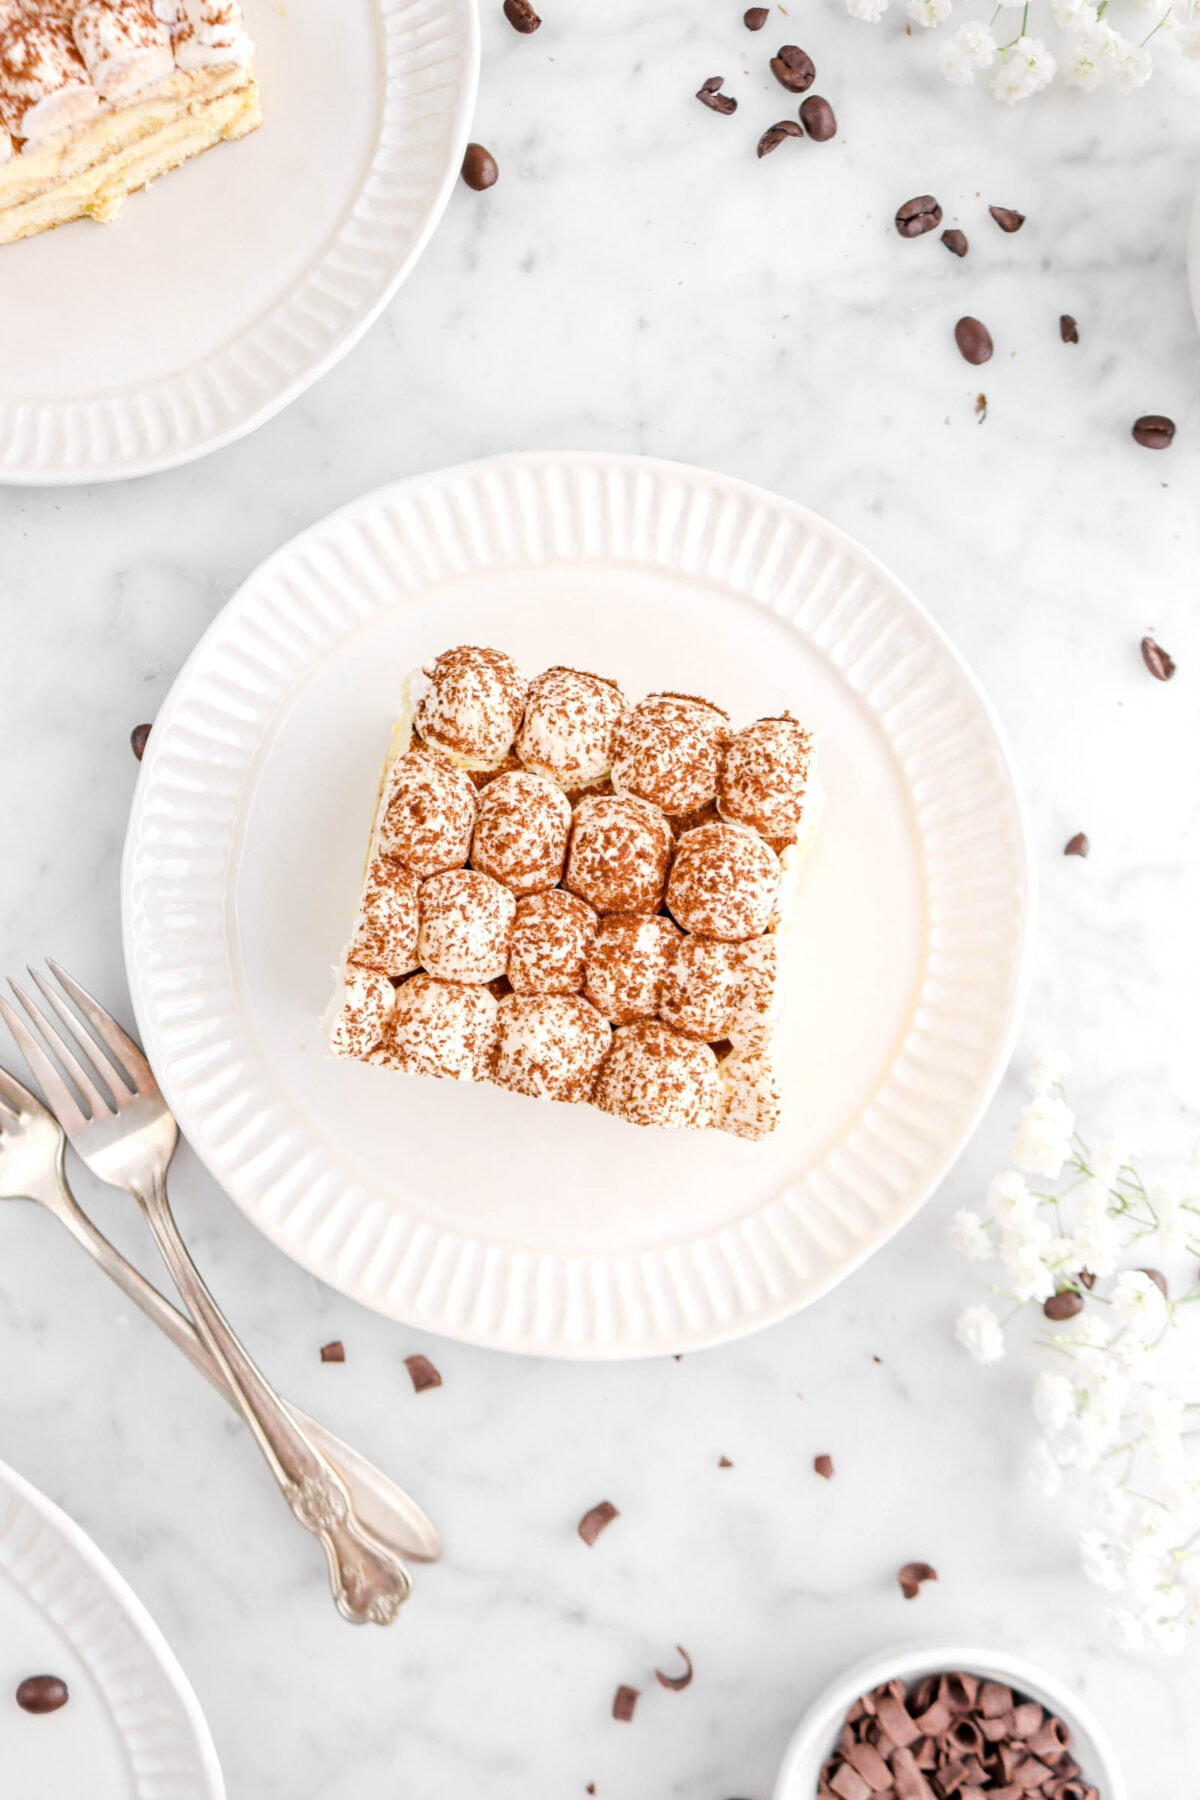 overhead shot of slice of tiramisu on white plate with two forks beside and coffee beans scattered around